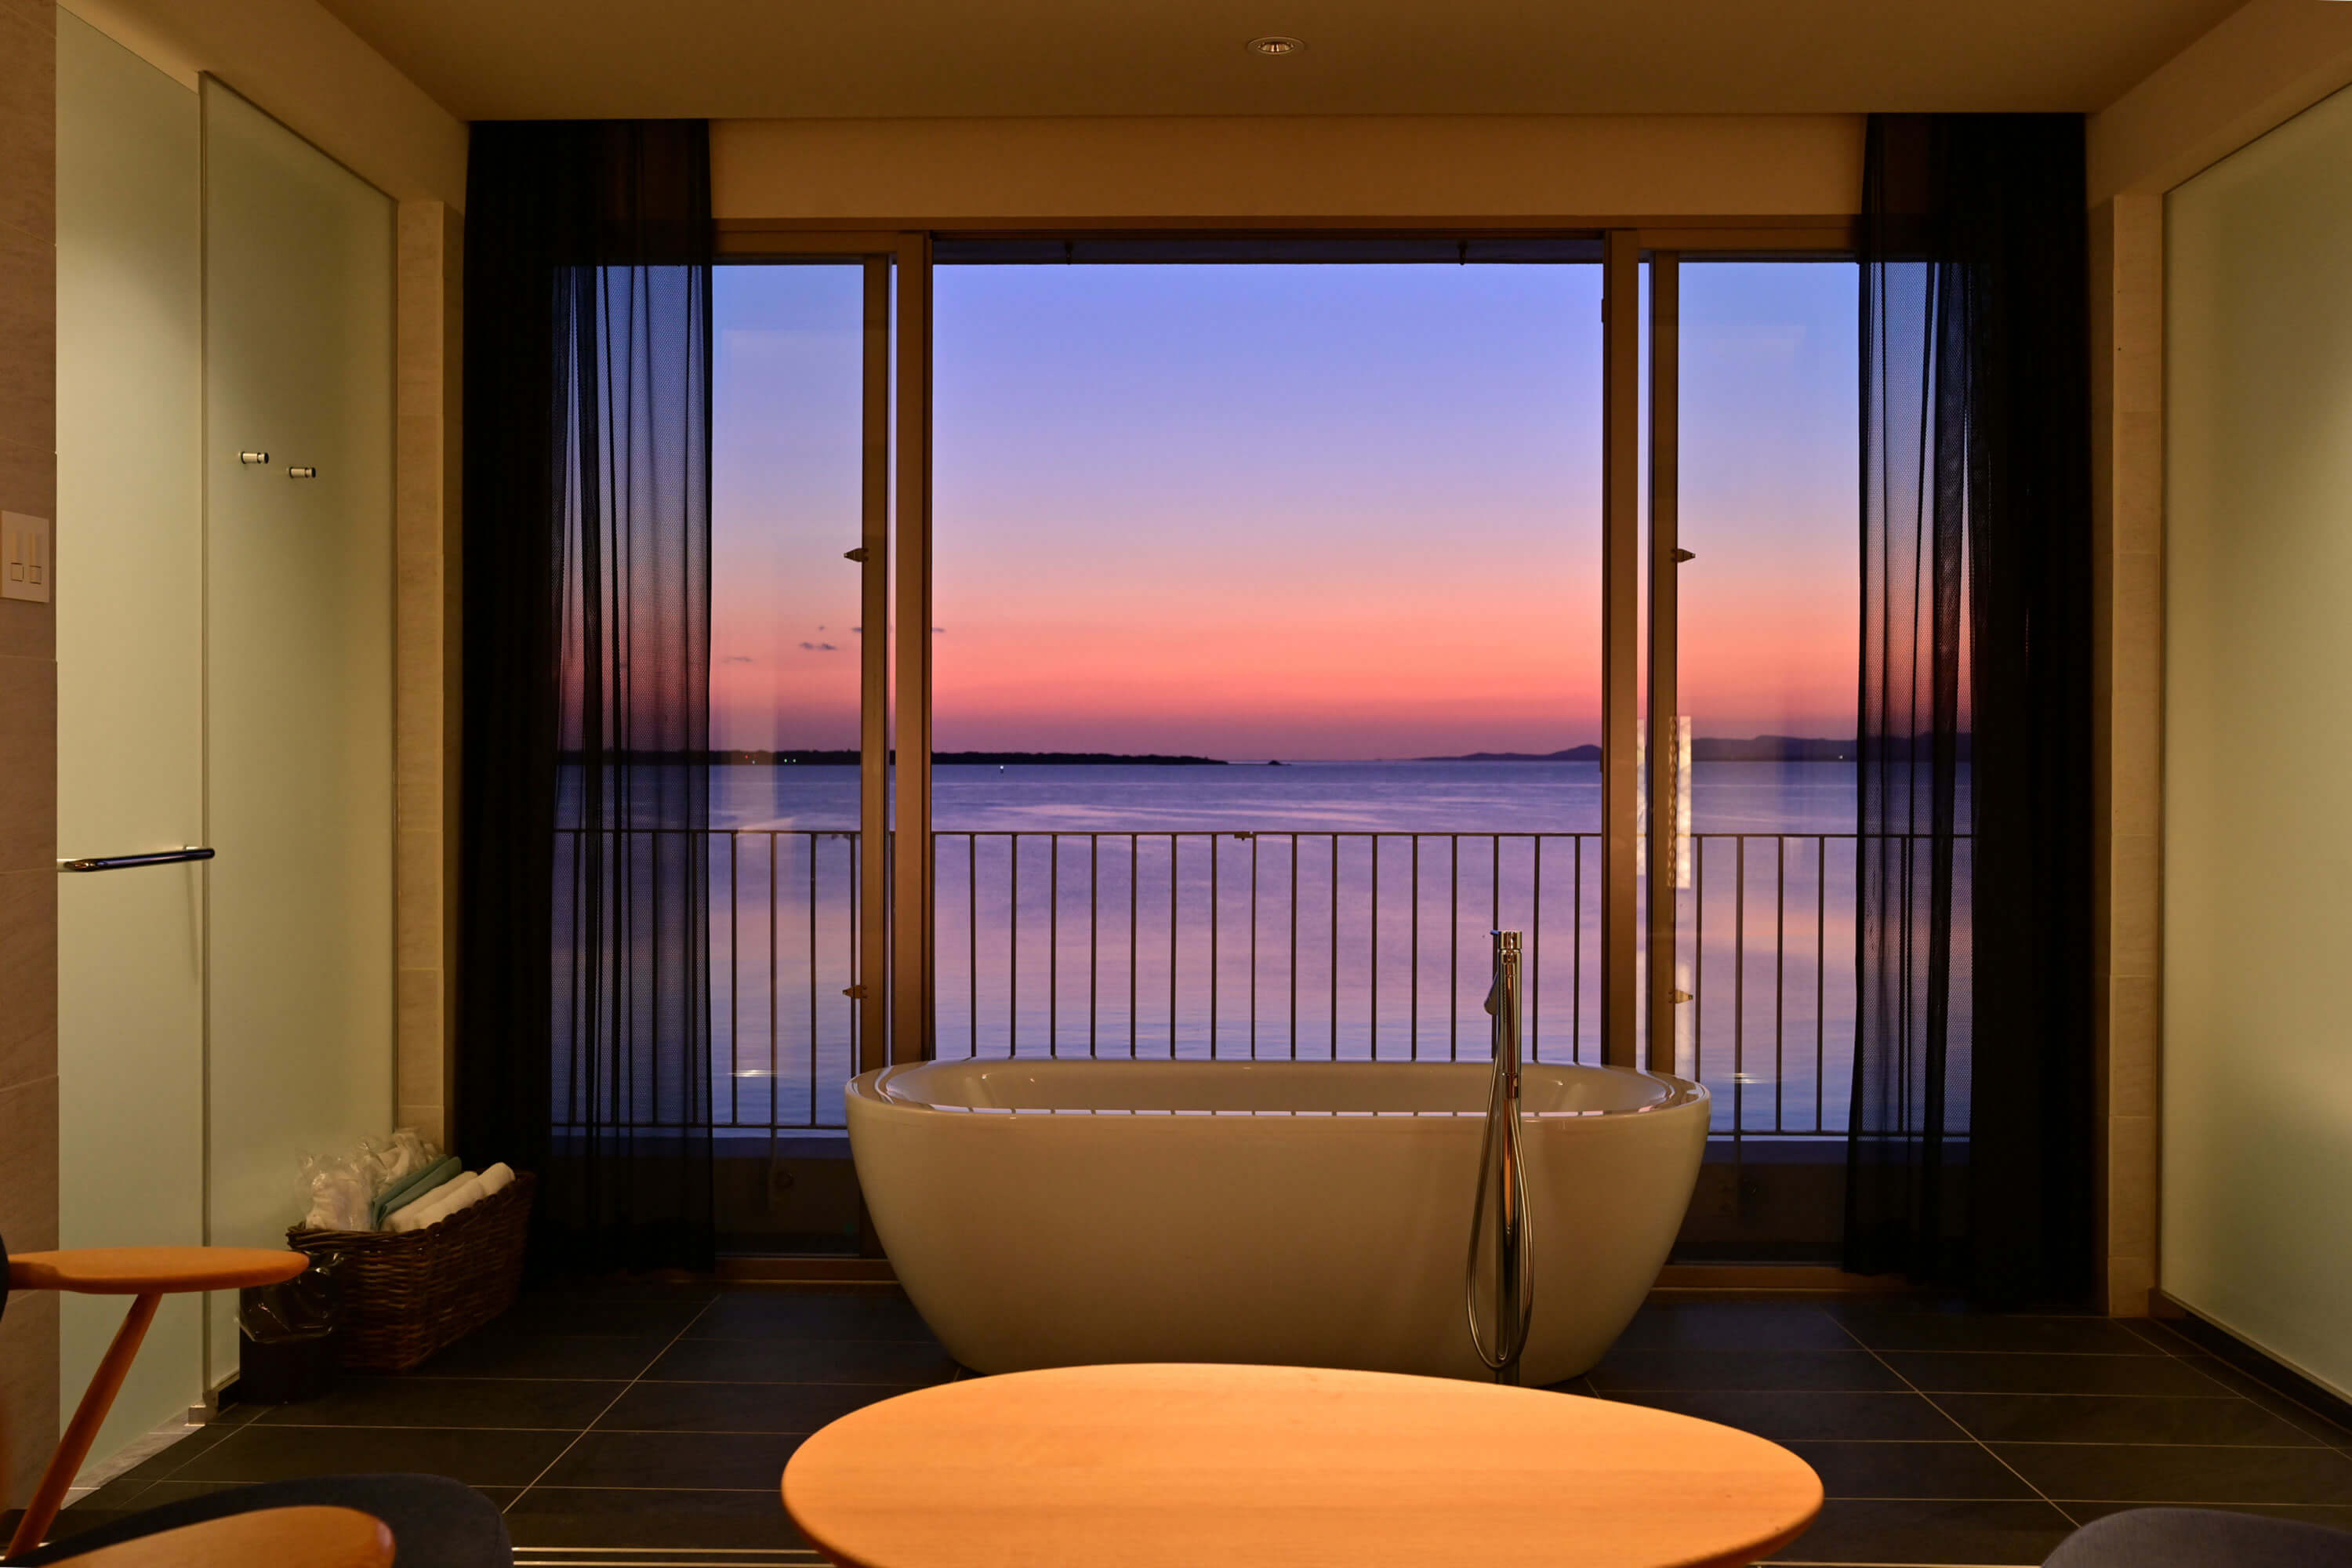 New Wing OCEAN GARDEN’s Ukifune is equipped with a luxurious bathtub for relaxing while gazing at the sea and sky right underneath your eyes.